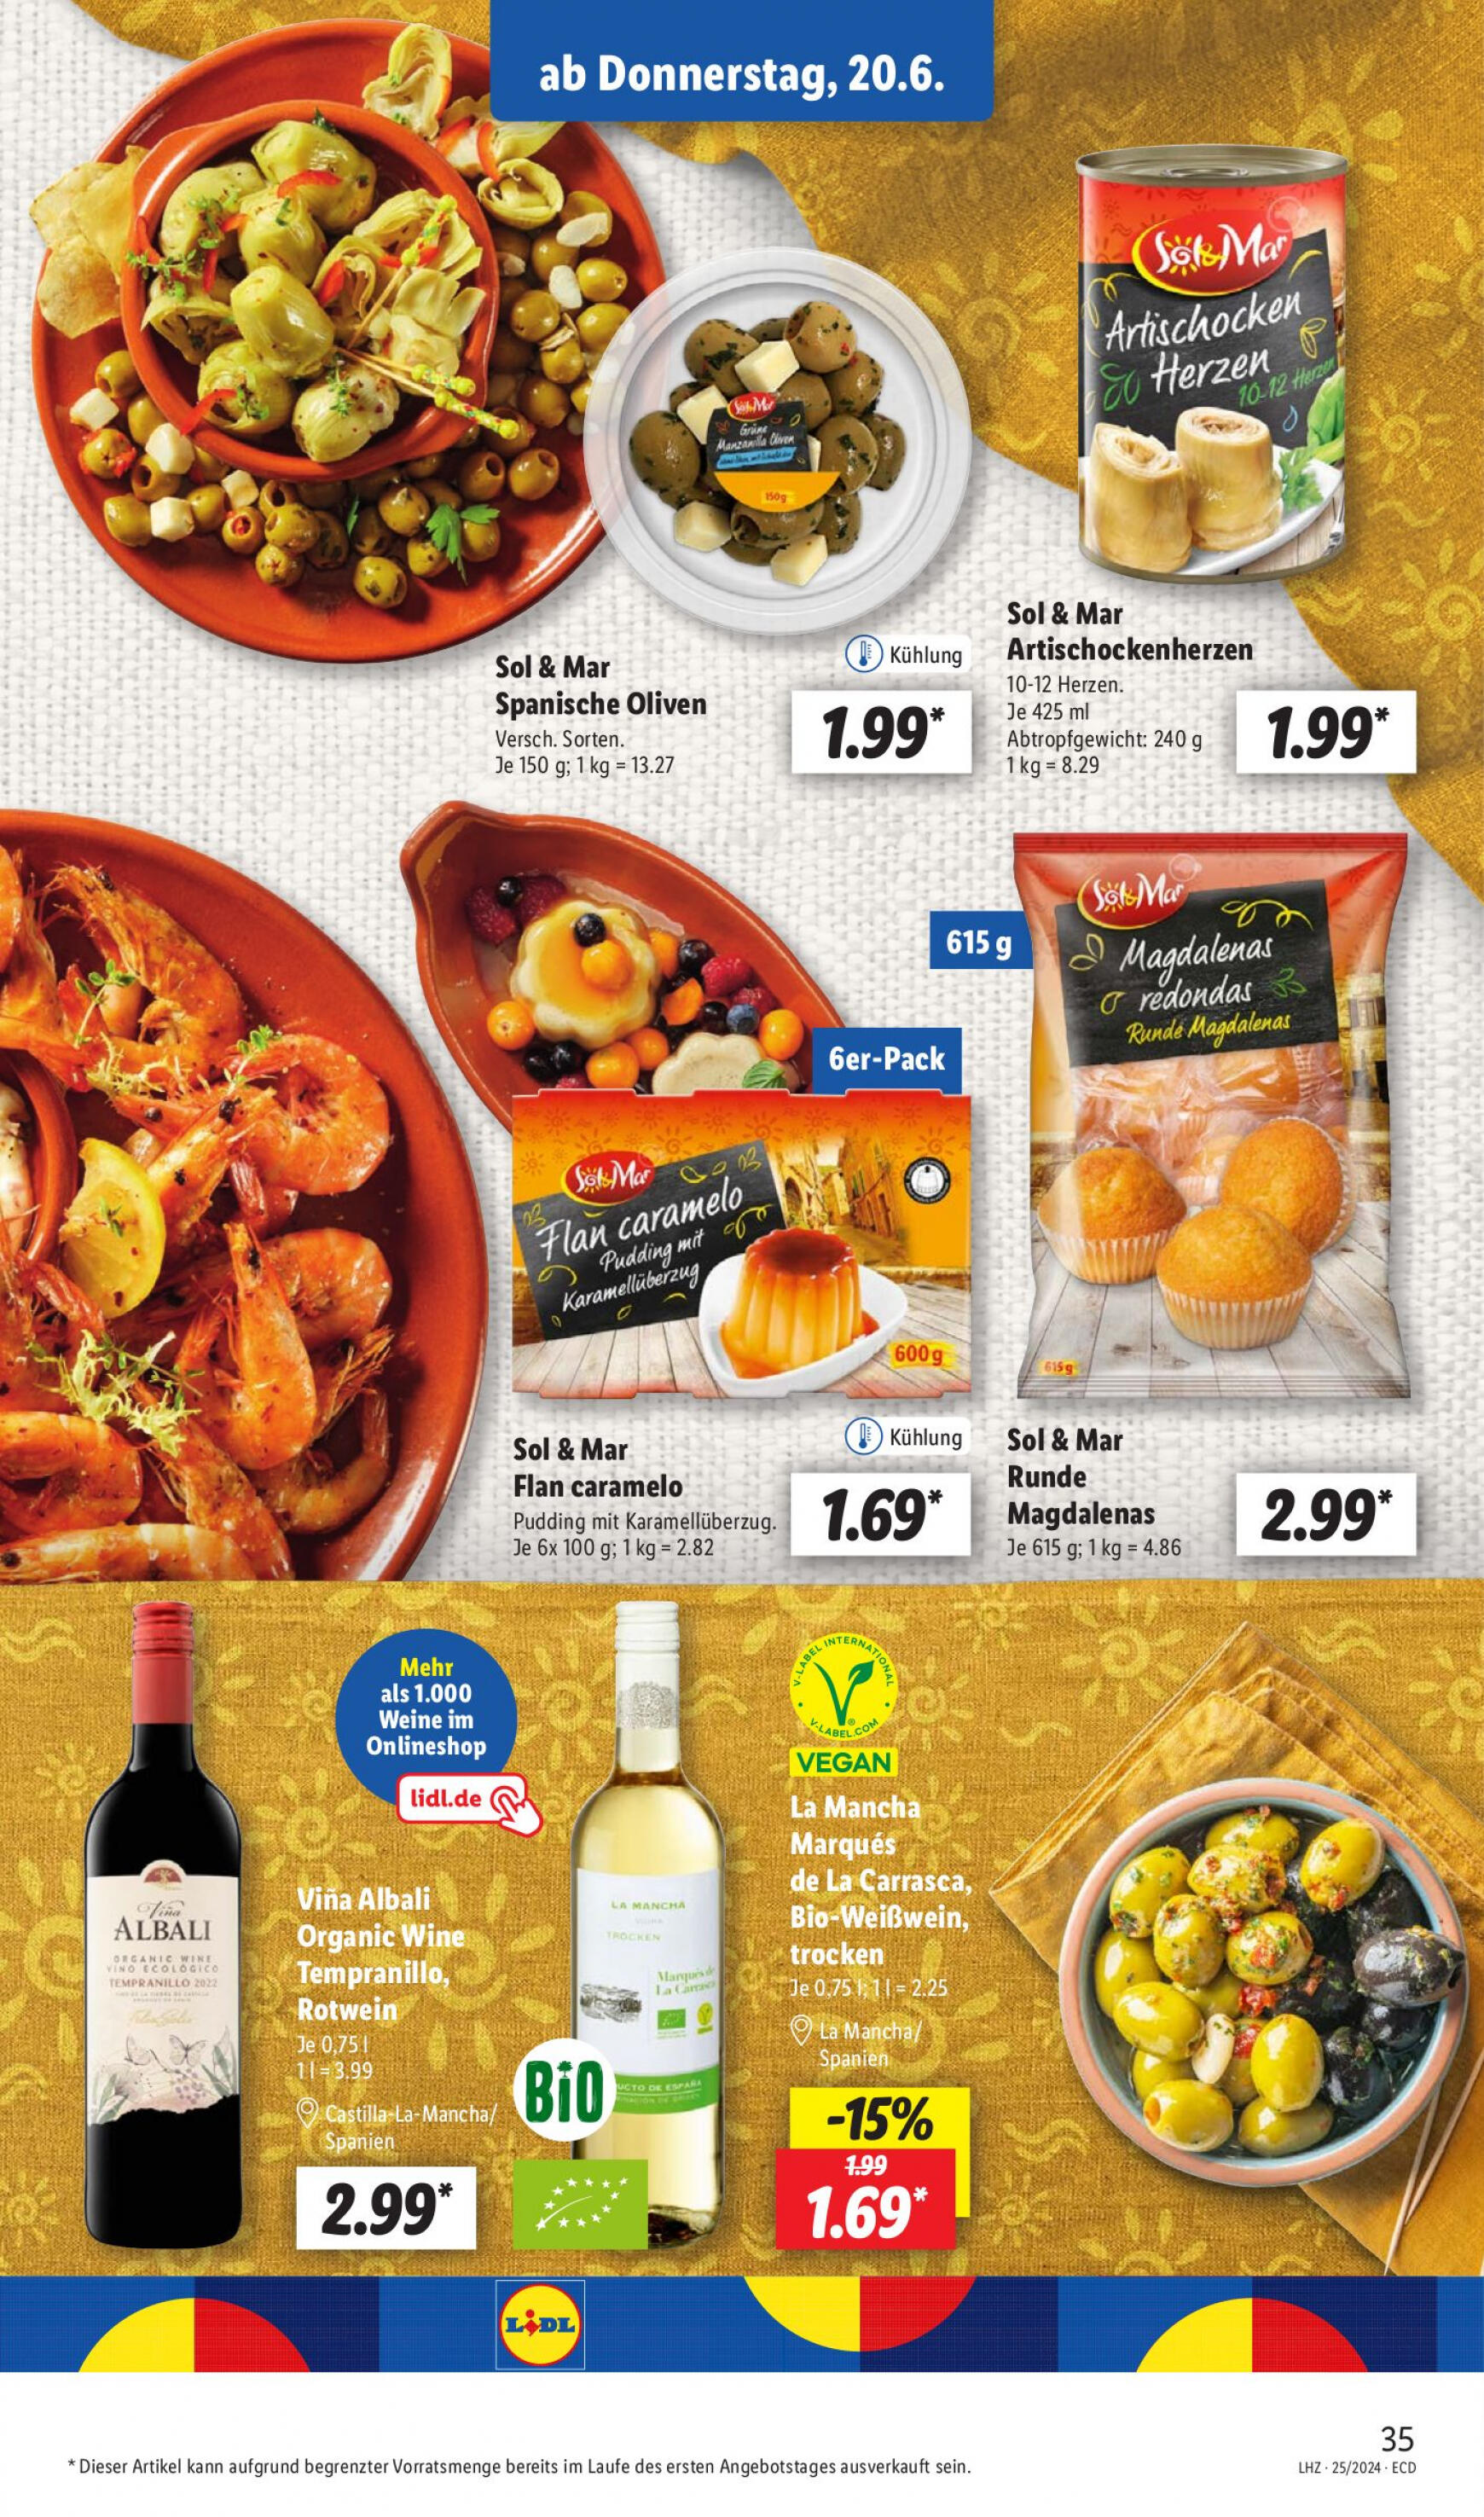 lidl - Flyer Lidl aktuell 17.06. - 22.06. - page: 45